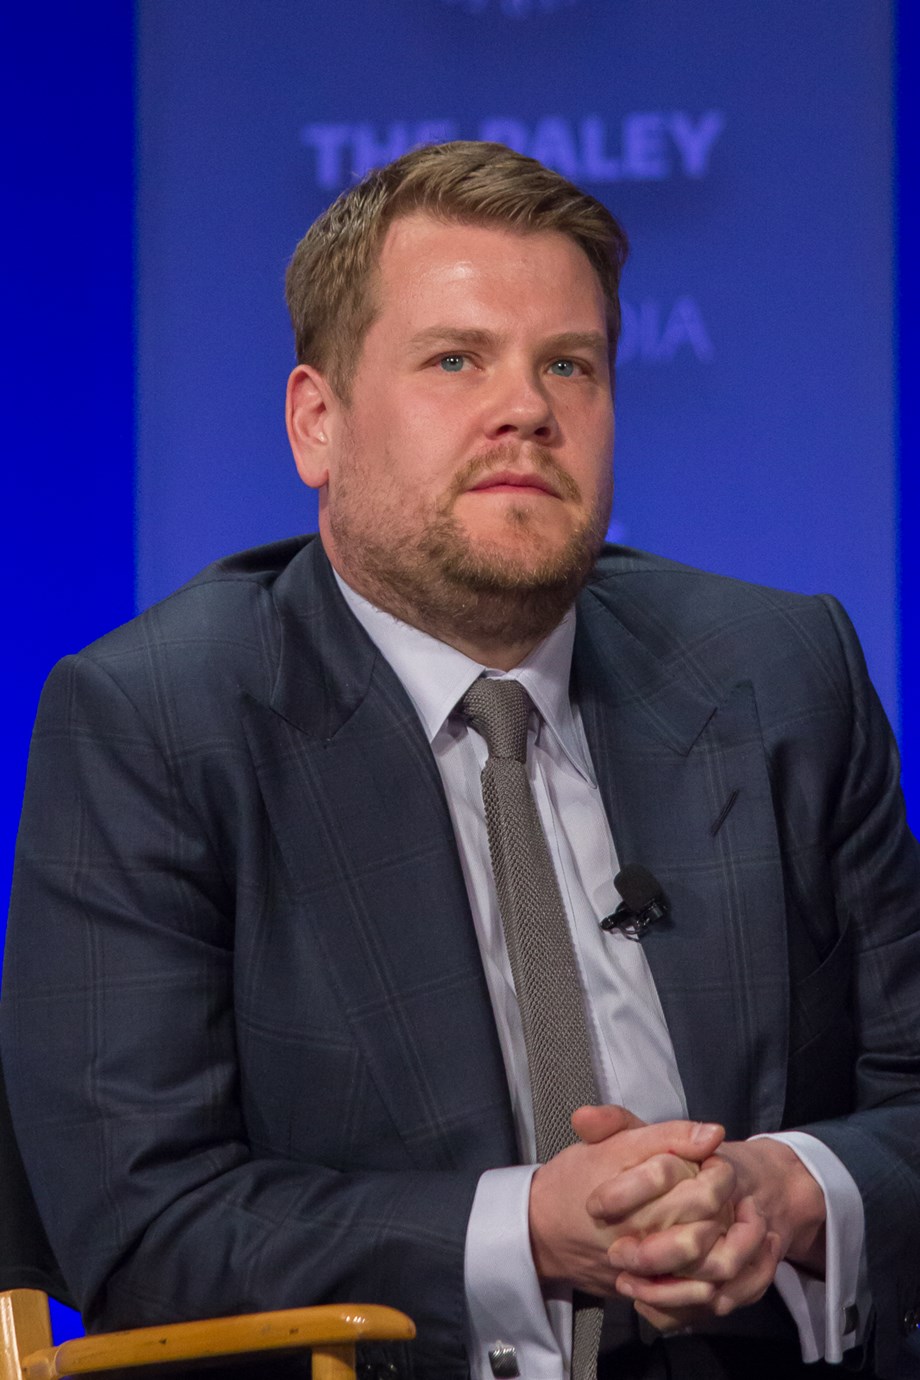 Entertainment News Roundup: Comedian James Corden to leave his CBS late-night show next year; Sophie Marceau swaps Paris for new life in LA in ‘I Love America’ and more